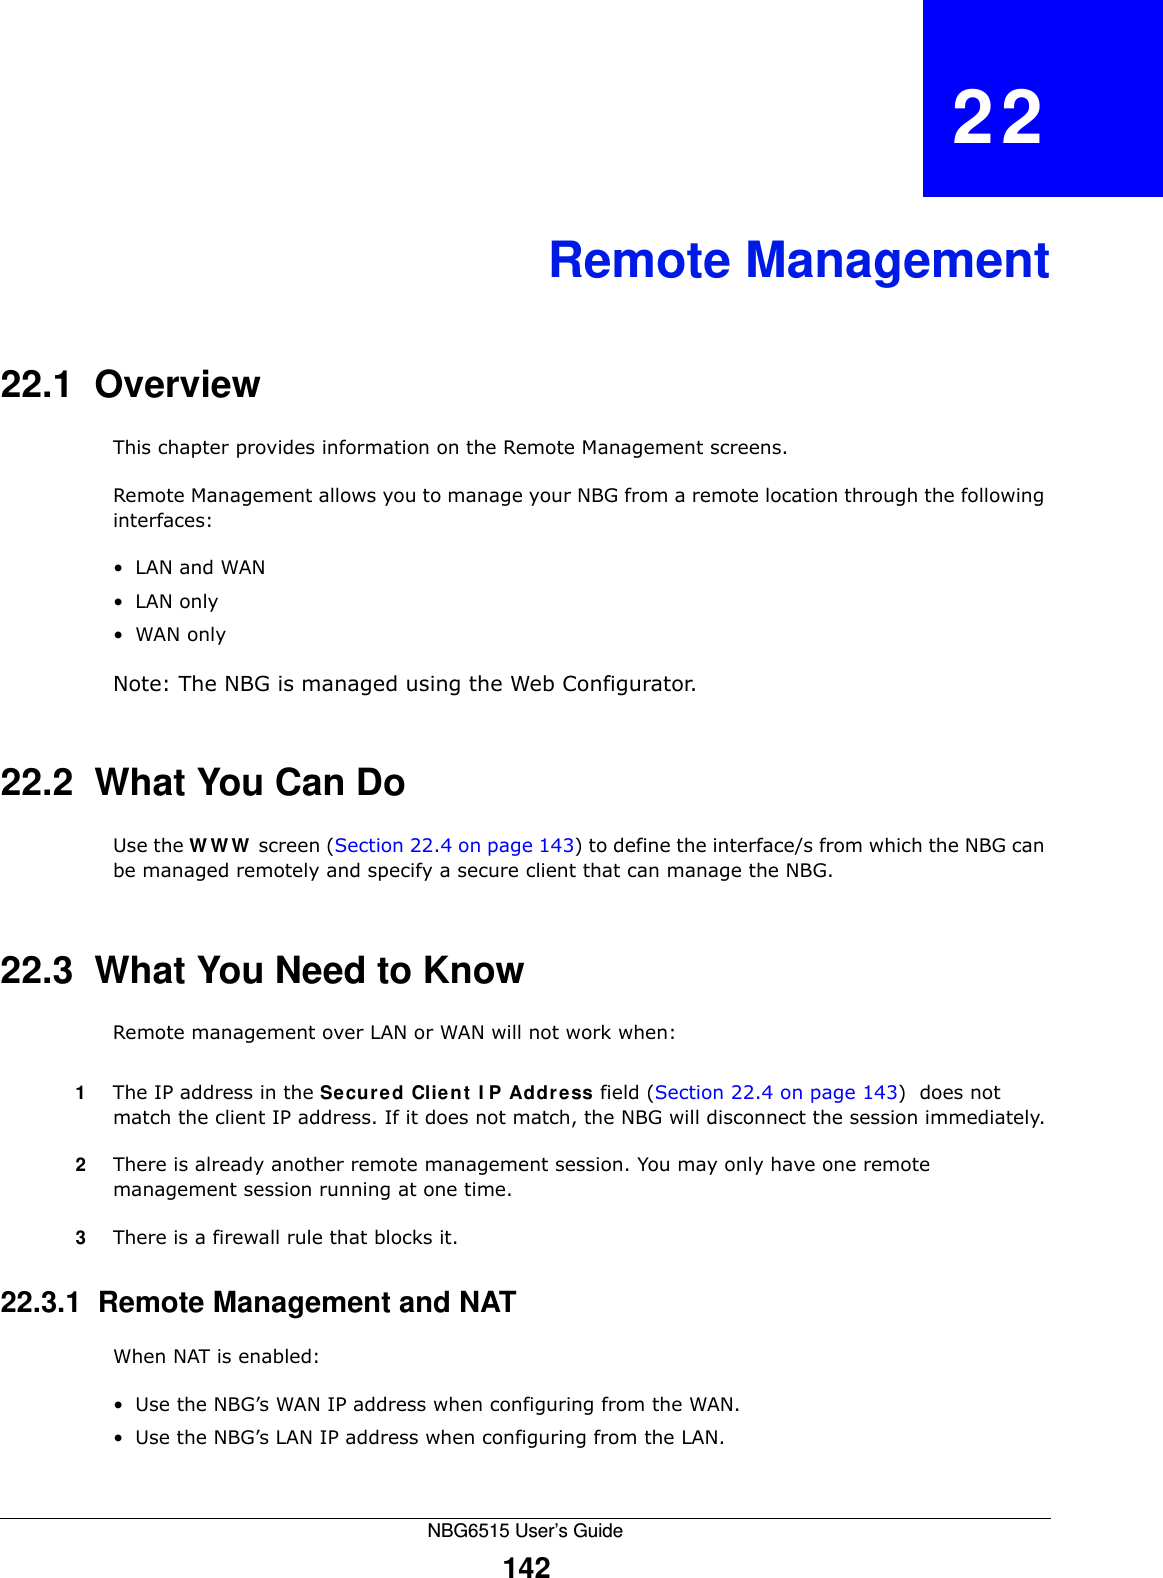 NBG6515 User’s Guide142CHAPTER   22Remote Management22.1  OverviewThis chapter provides information on the Remote Management screens. Remote Management allows you to manage your NBG from a remote location through the following interfaces:•LAN and WAN•LAN only•WAN onlyNote: The NBG is managed using the Web Configurator.22.2  What You Can DoUse the WWW screen (Section 22.4 on page 143) to define the interface/s from which the NBG can be managed remotely and specify a secure client that can manage the NBG.22.3  What You Need to KnowRemote management over LAN or WAN will not work when:1The IP address in the Secured Client IP Address field (Section 22.4 on page 143)  does not match the client IP address. If it does not match, the NBG will disconnect the session immediately.2There is already another remote management session. You may only have one remote management session running at one time.3There is a firewall rule that blocks it.22.3.1  Remote Management and NATWhen NAT is enabled:• Use the NBG’s WAN IP address when configuring from the WAN. • Use the NBG’s LAN IP address when configuring from the LAN.